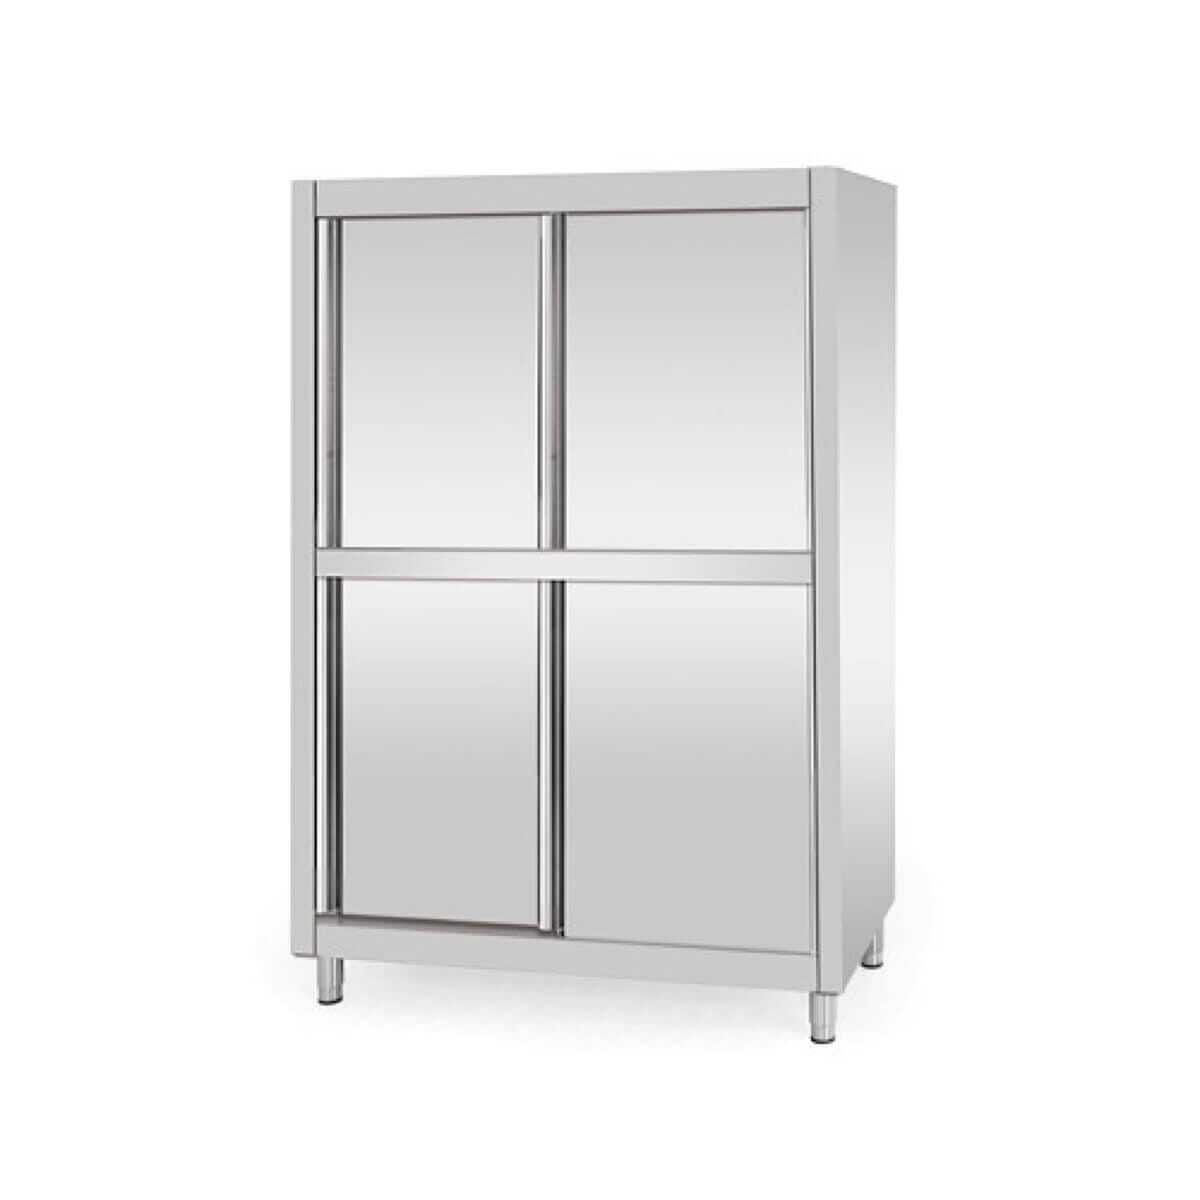 High stainless steel cabinet